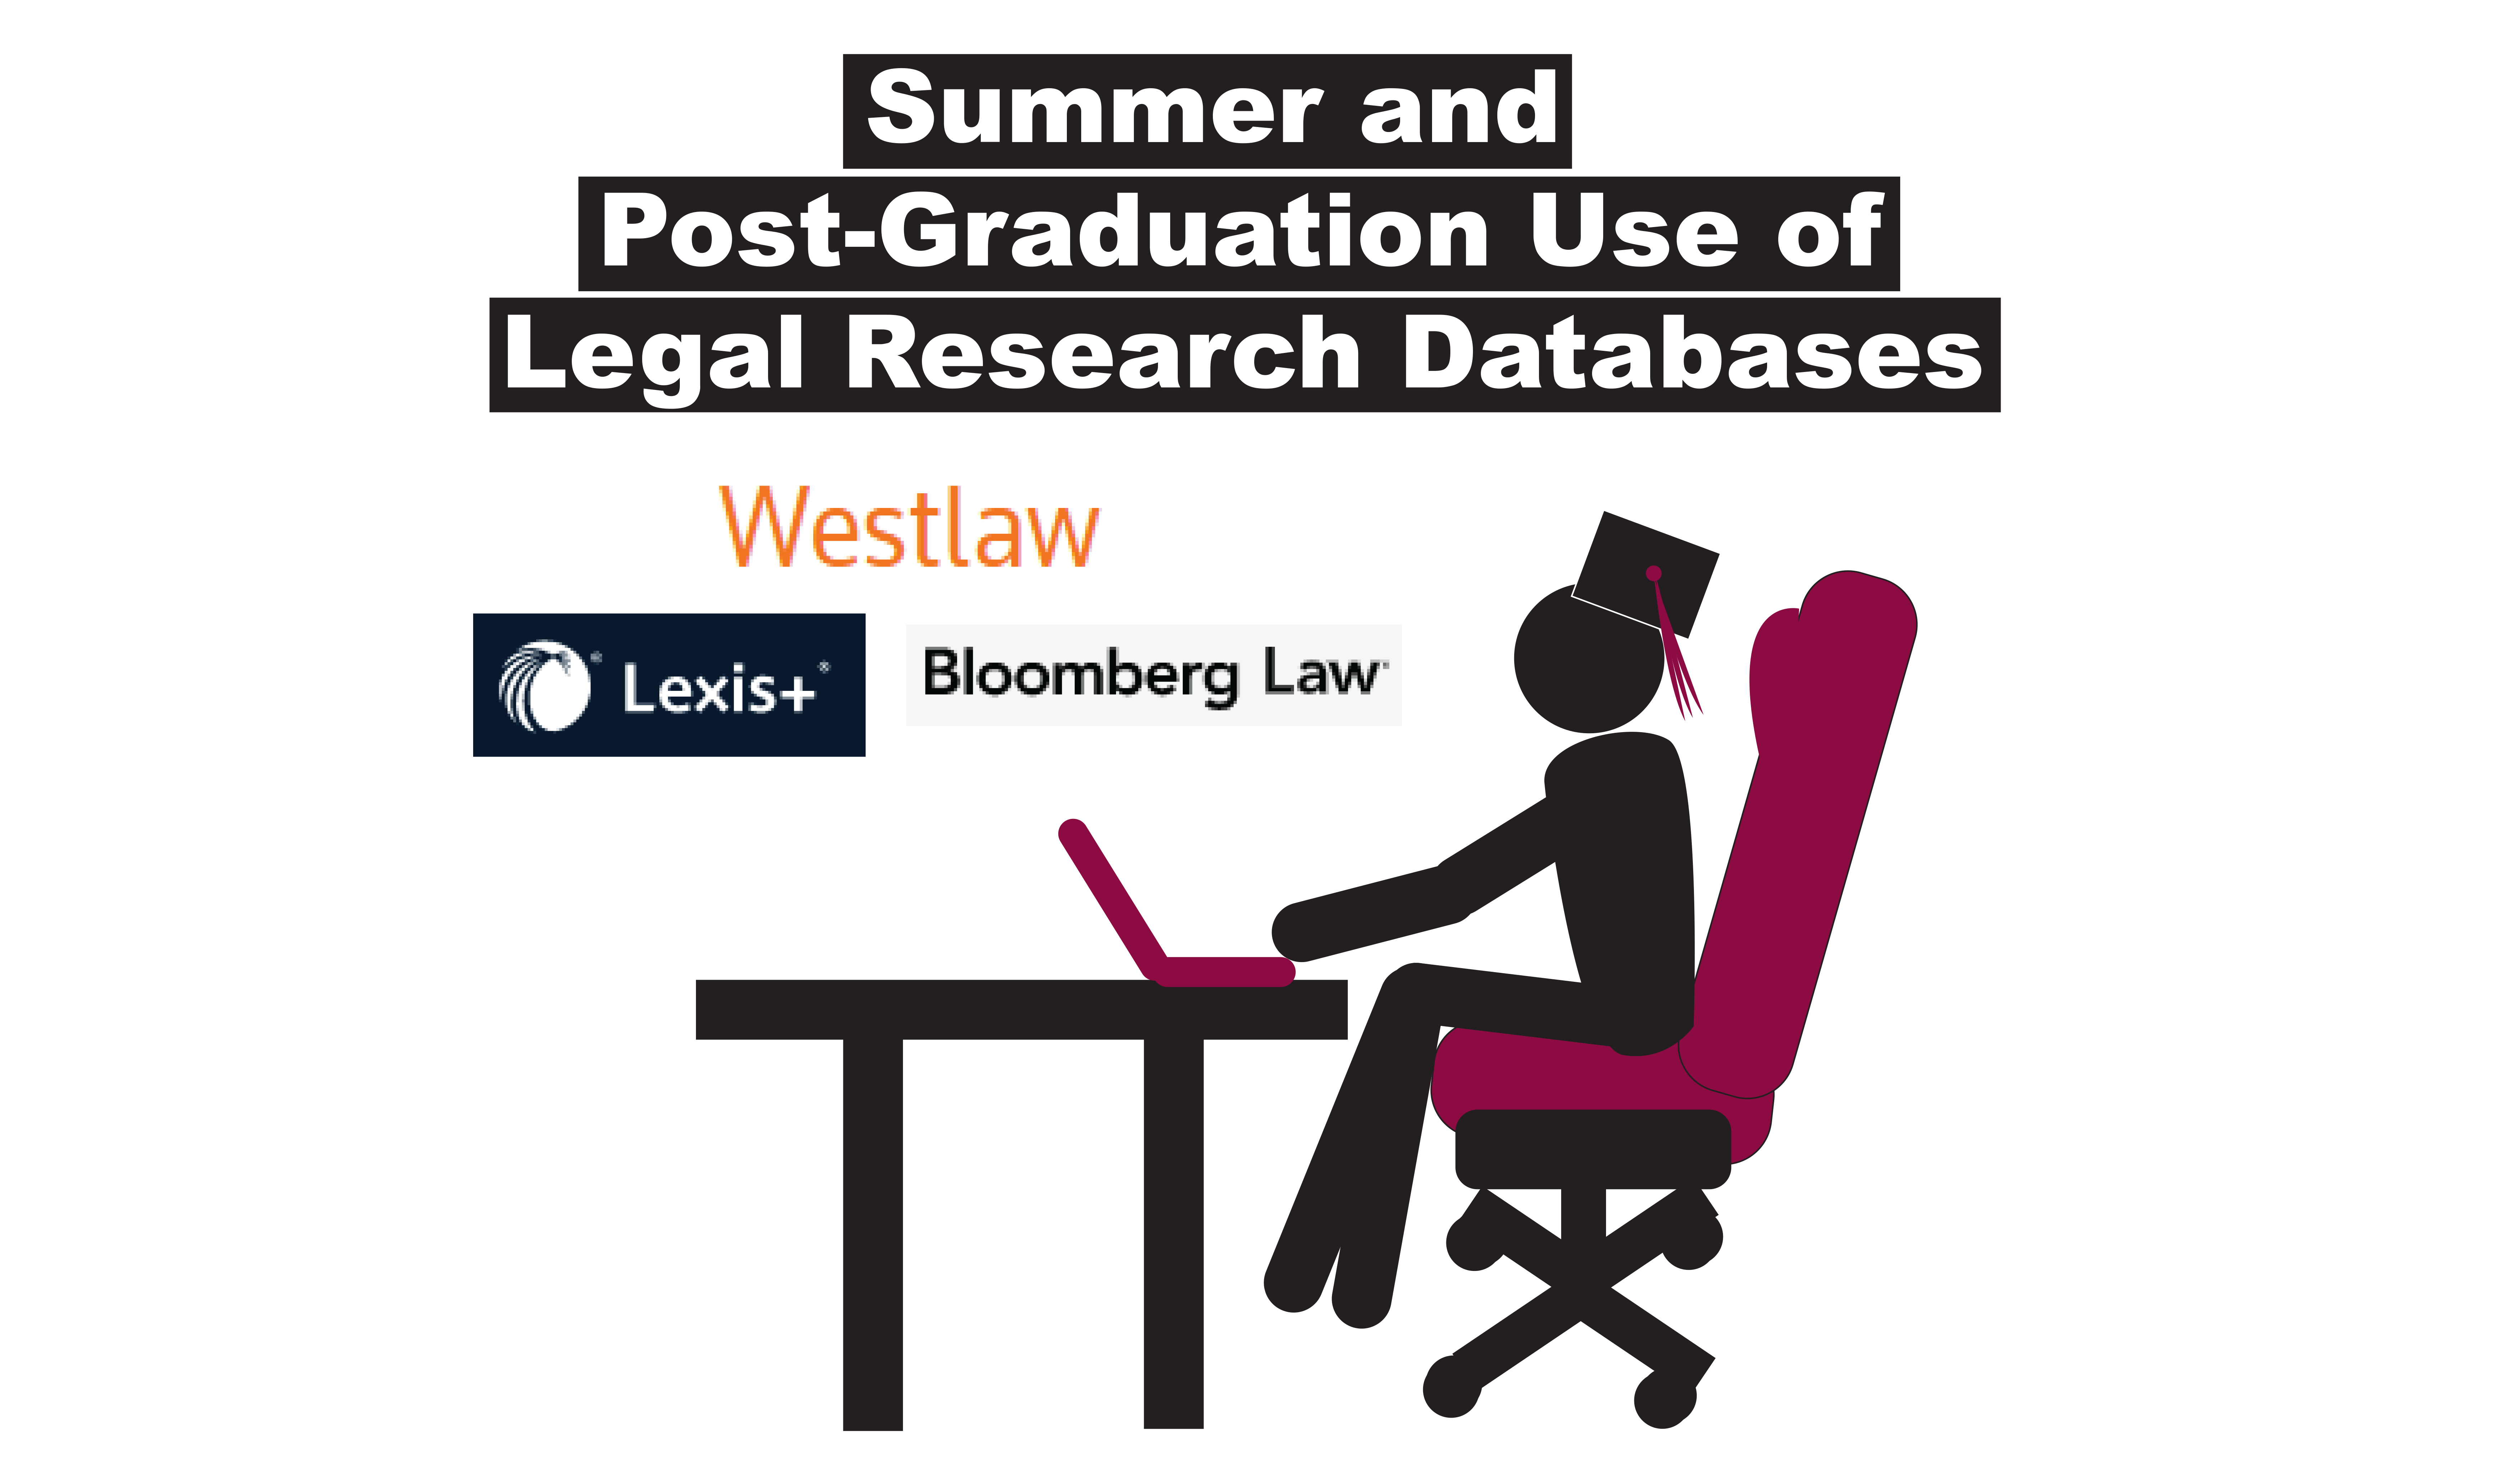 Postgraduate and summer access for Westlaw, Lexis, and Bloomberg Law